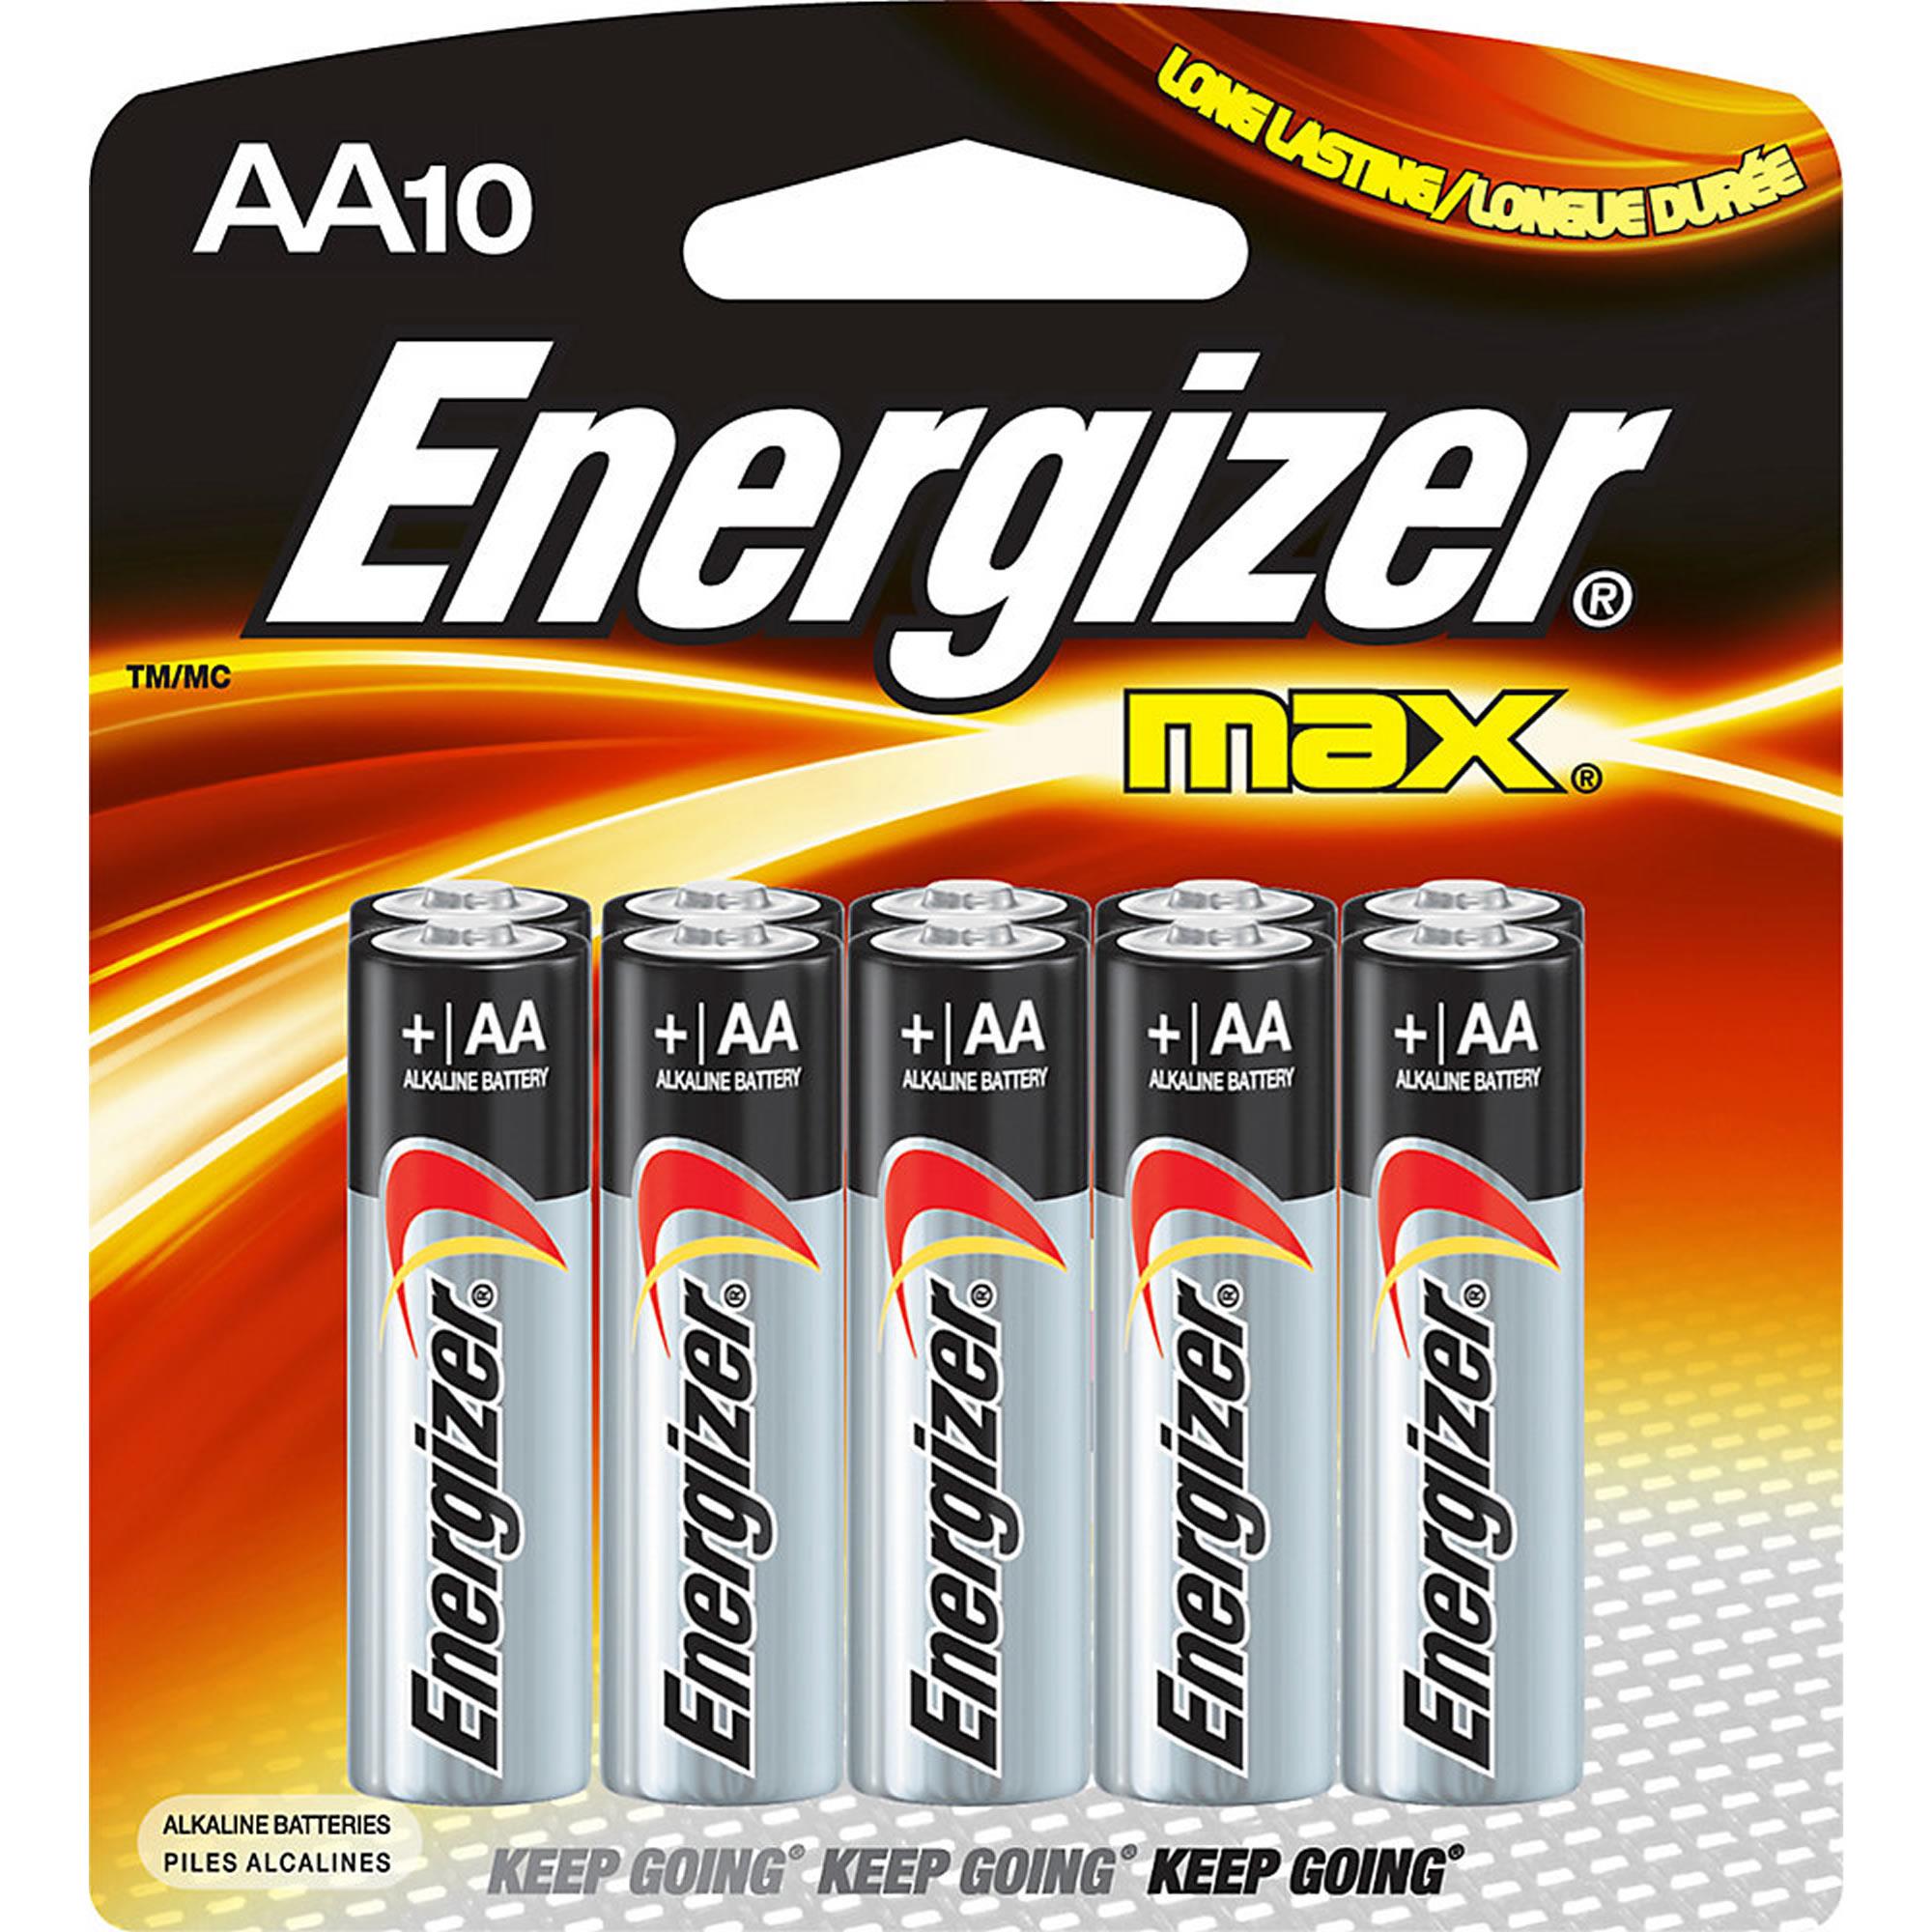 Energizer Aa Batteries 10 Pack